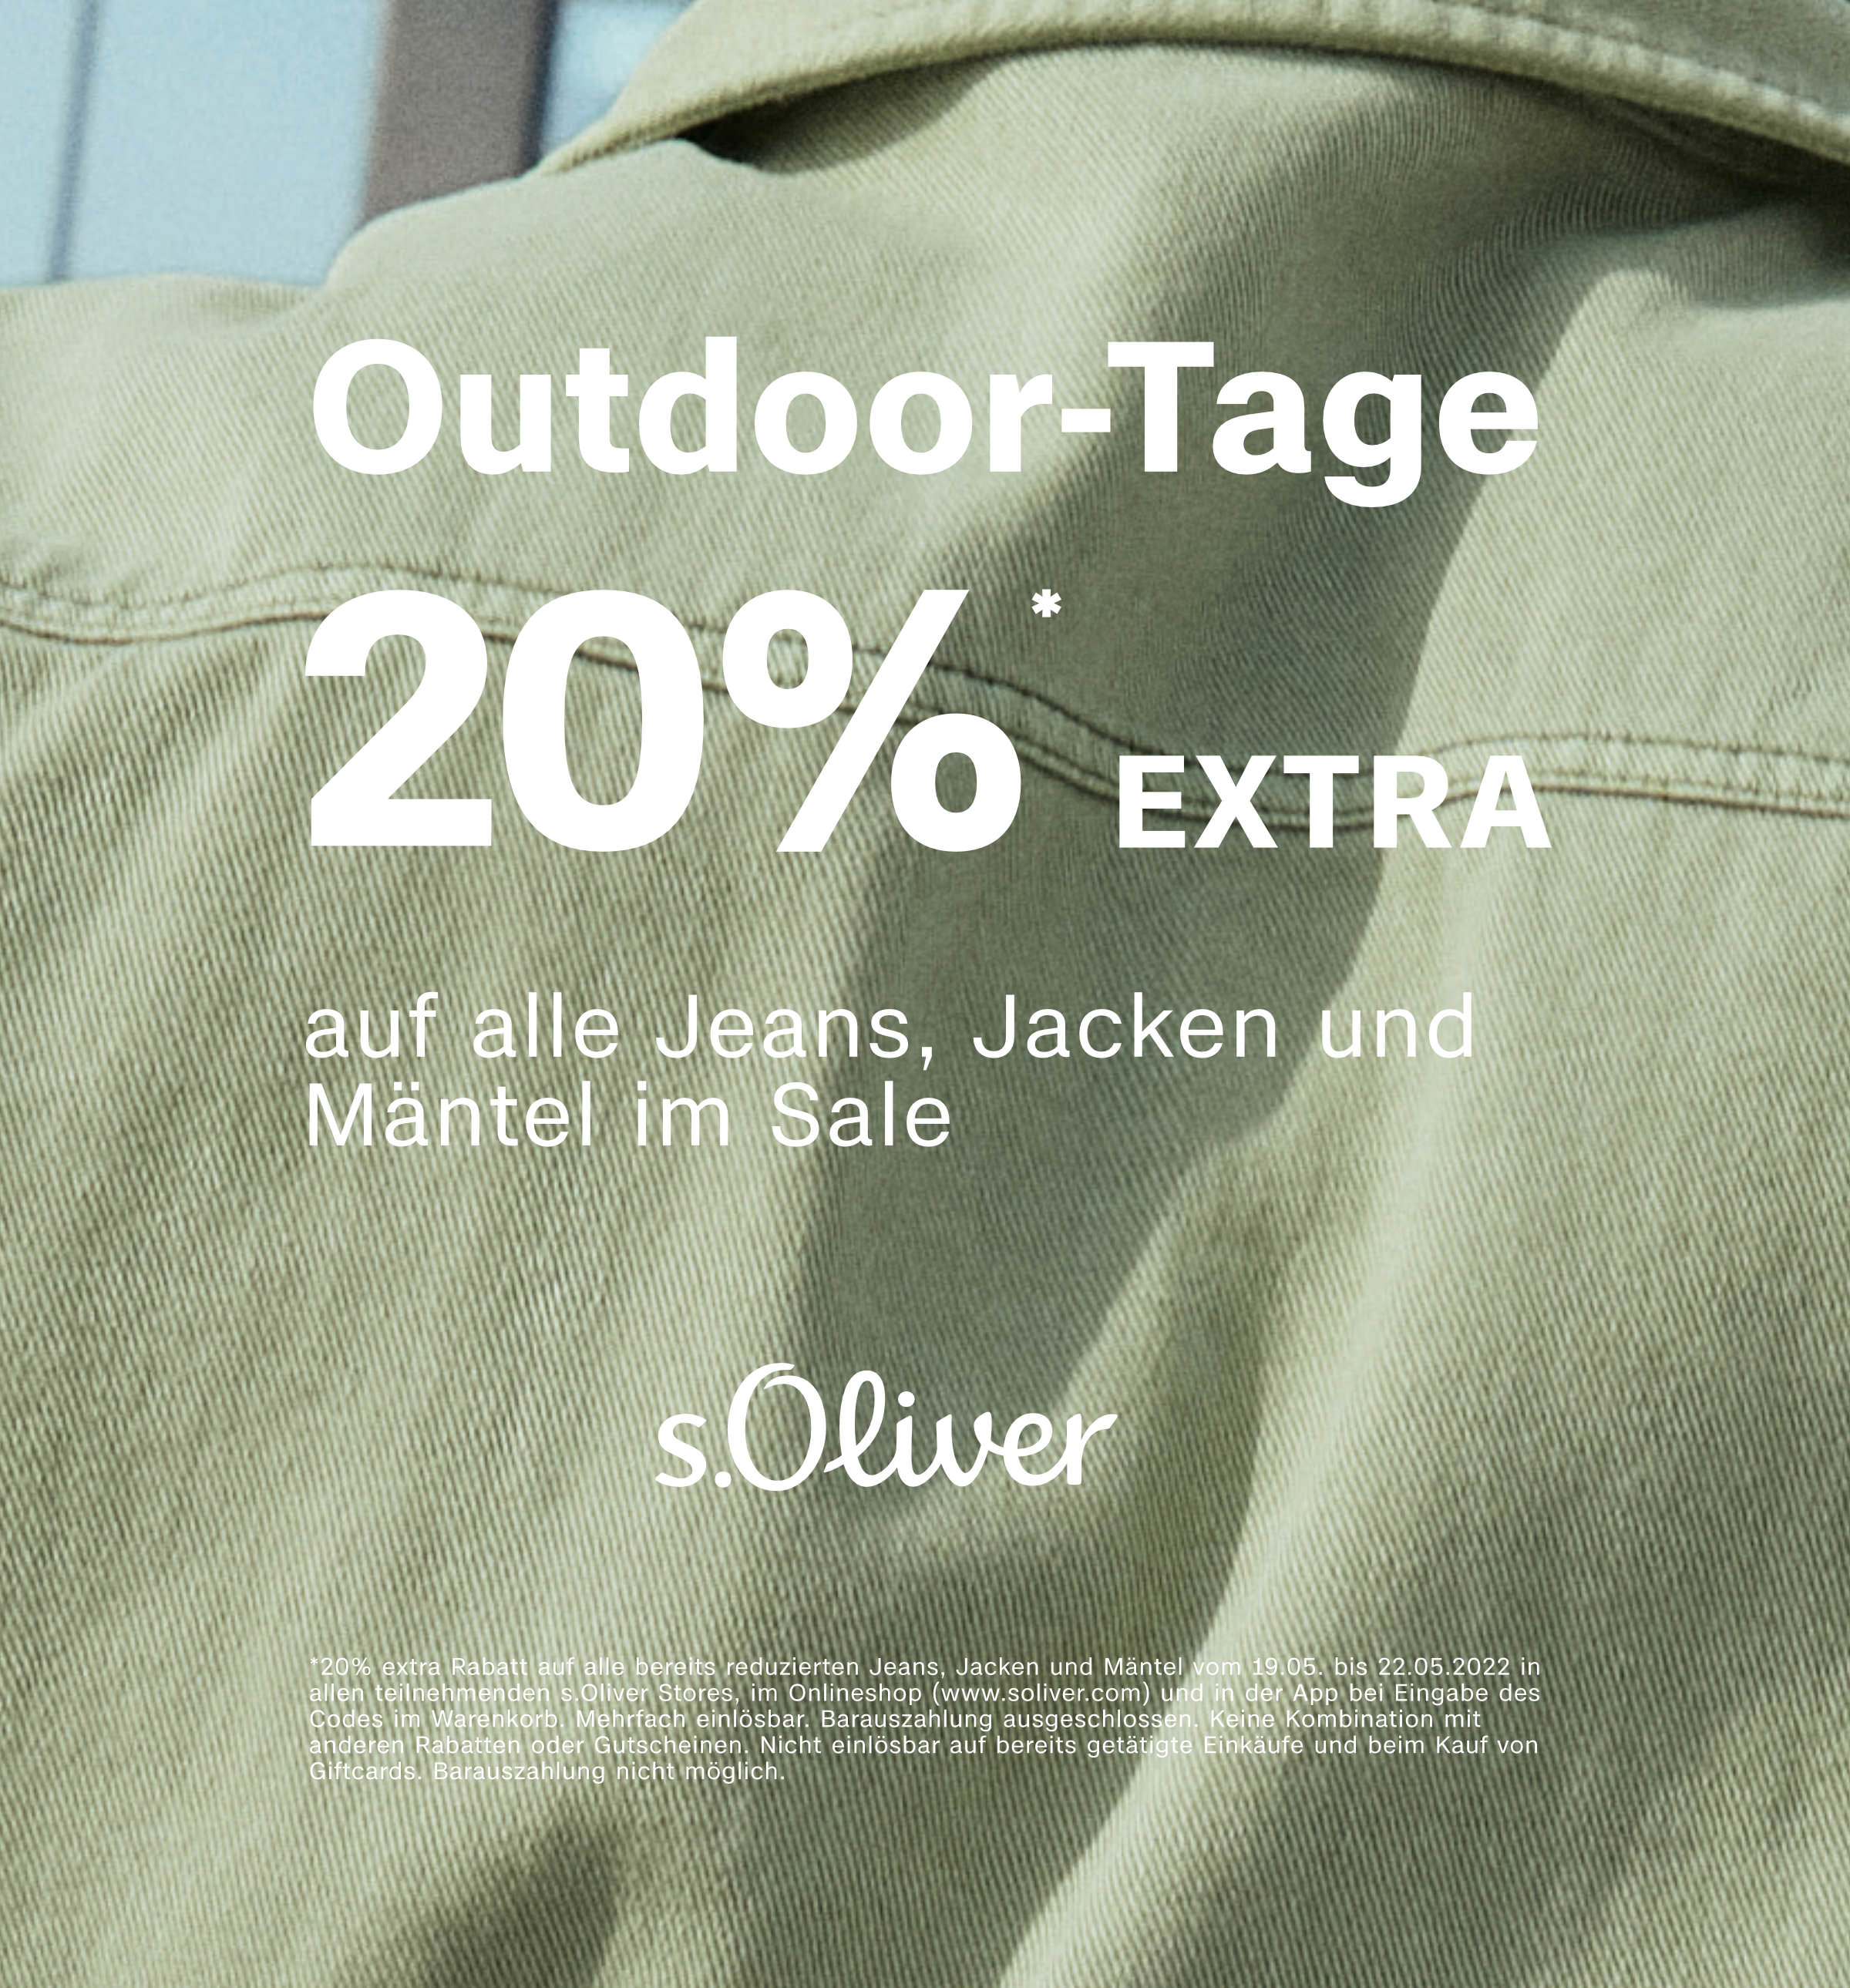 Fontwerk’s Case™ typeface in use for the fashion brand s.Oliver